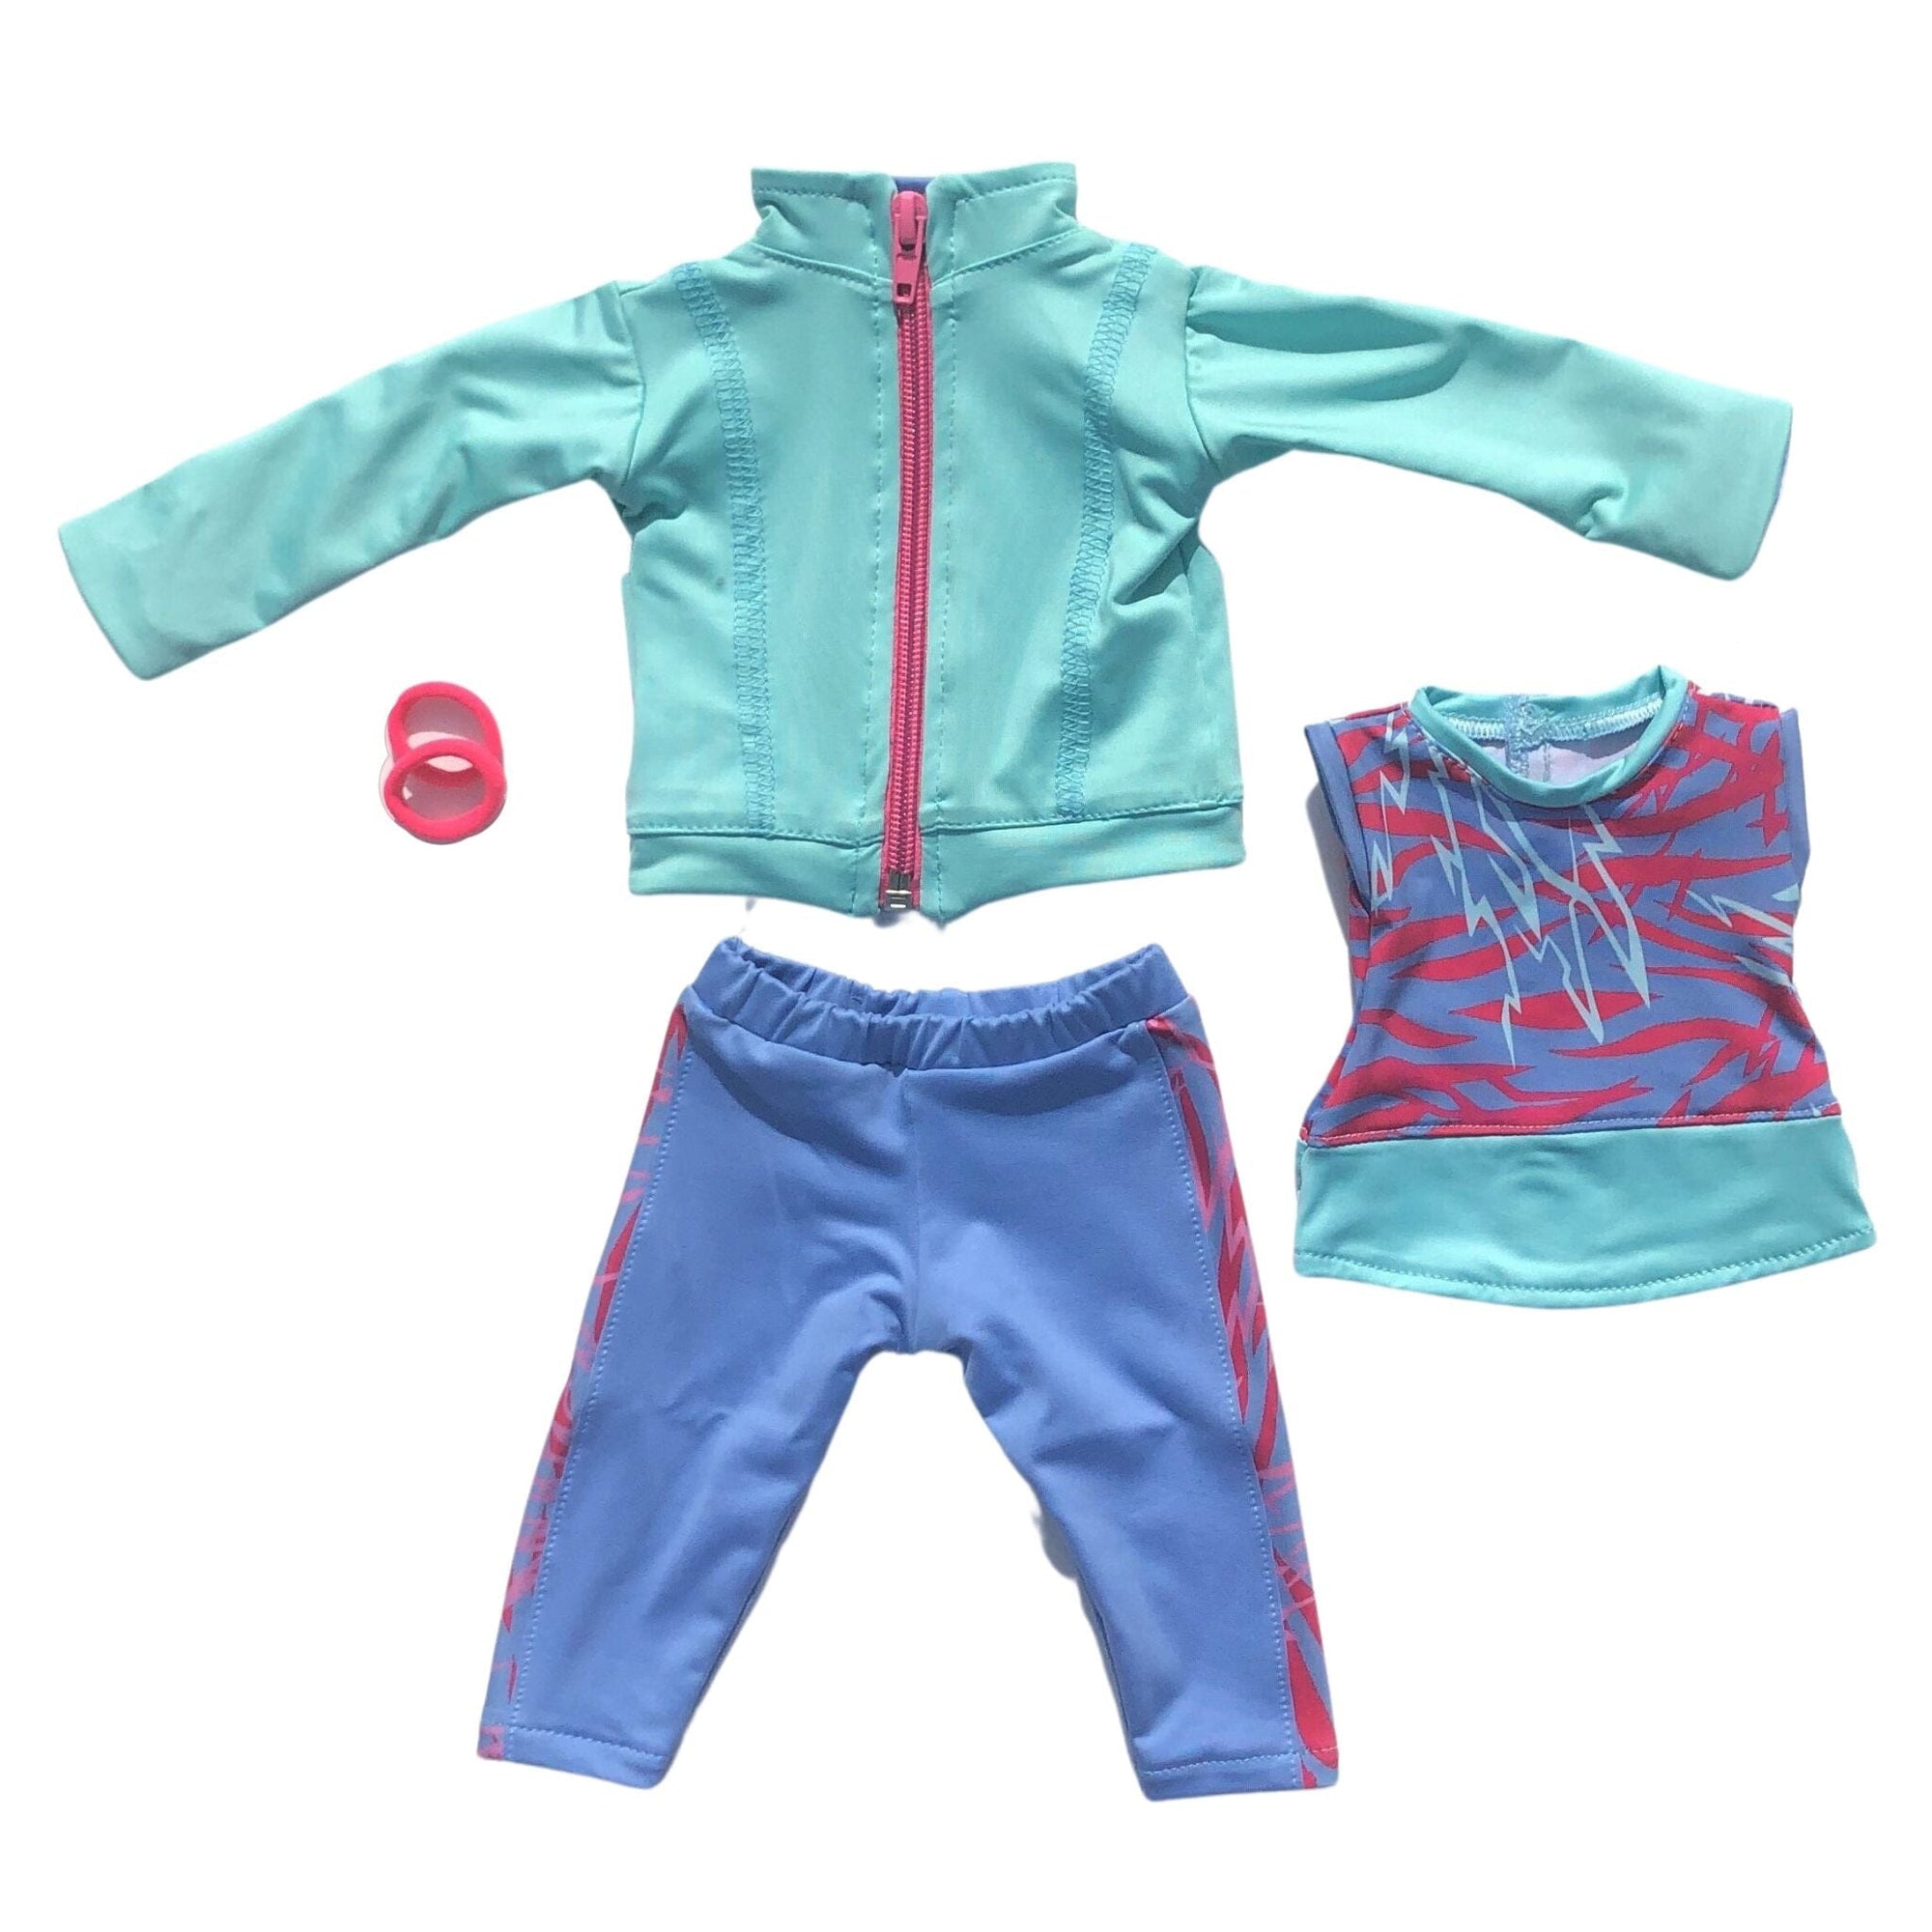 Ballet Yoga Training Suit Pajamas For American 18 Inch Girl Doll